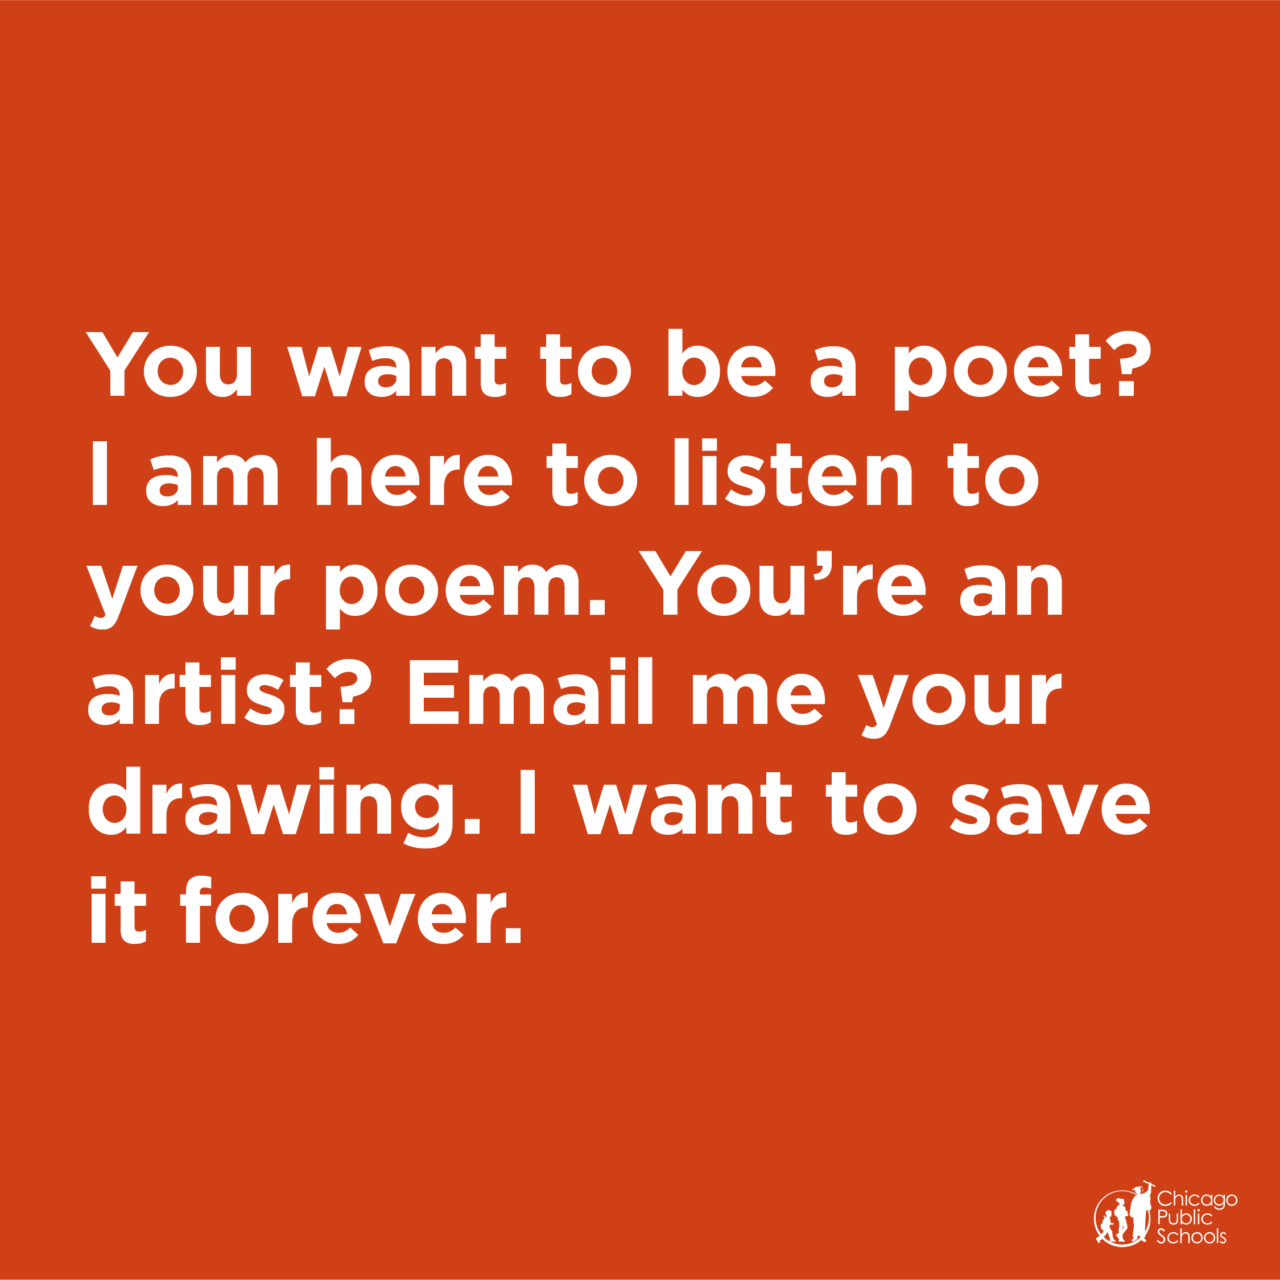 You want to be a poet? I am here to listen to...